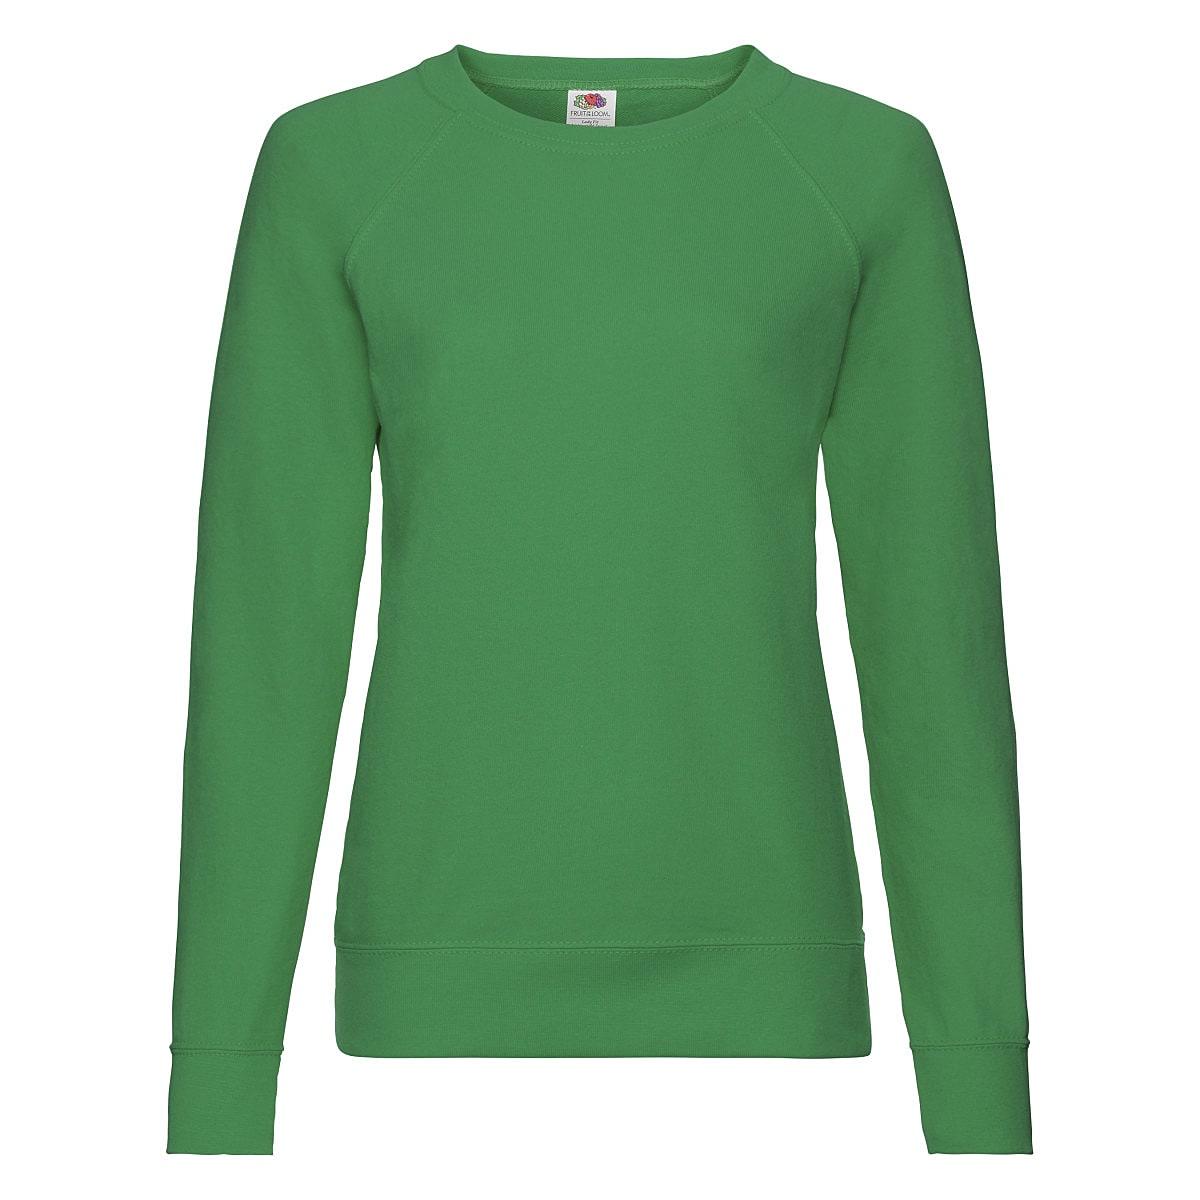 Fruit Of The Loom Lady-Fit Lightweight Raglan Sweater in Kelly Green (Product Code: 62146)